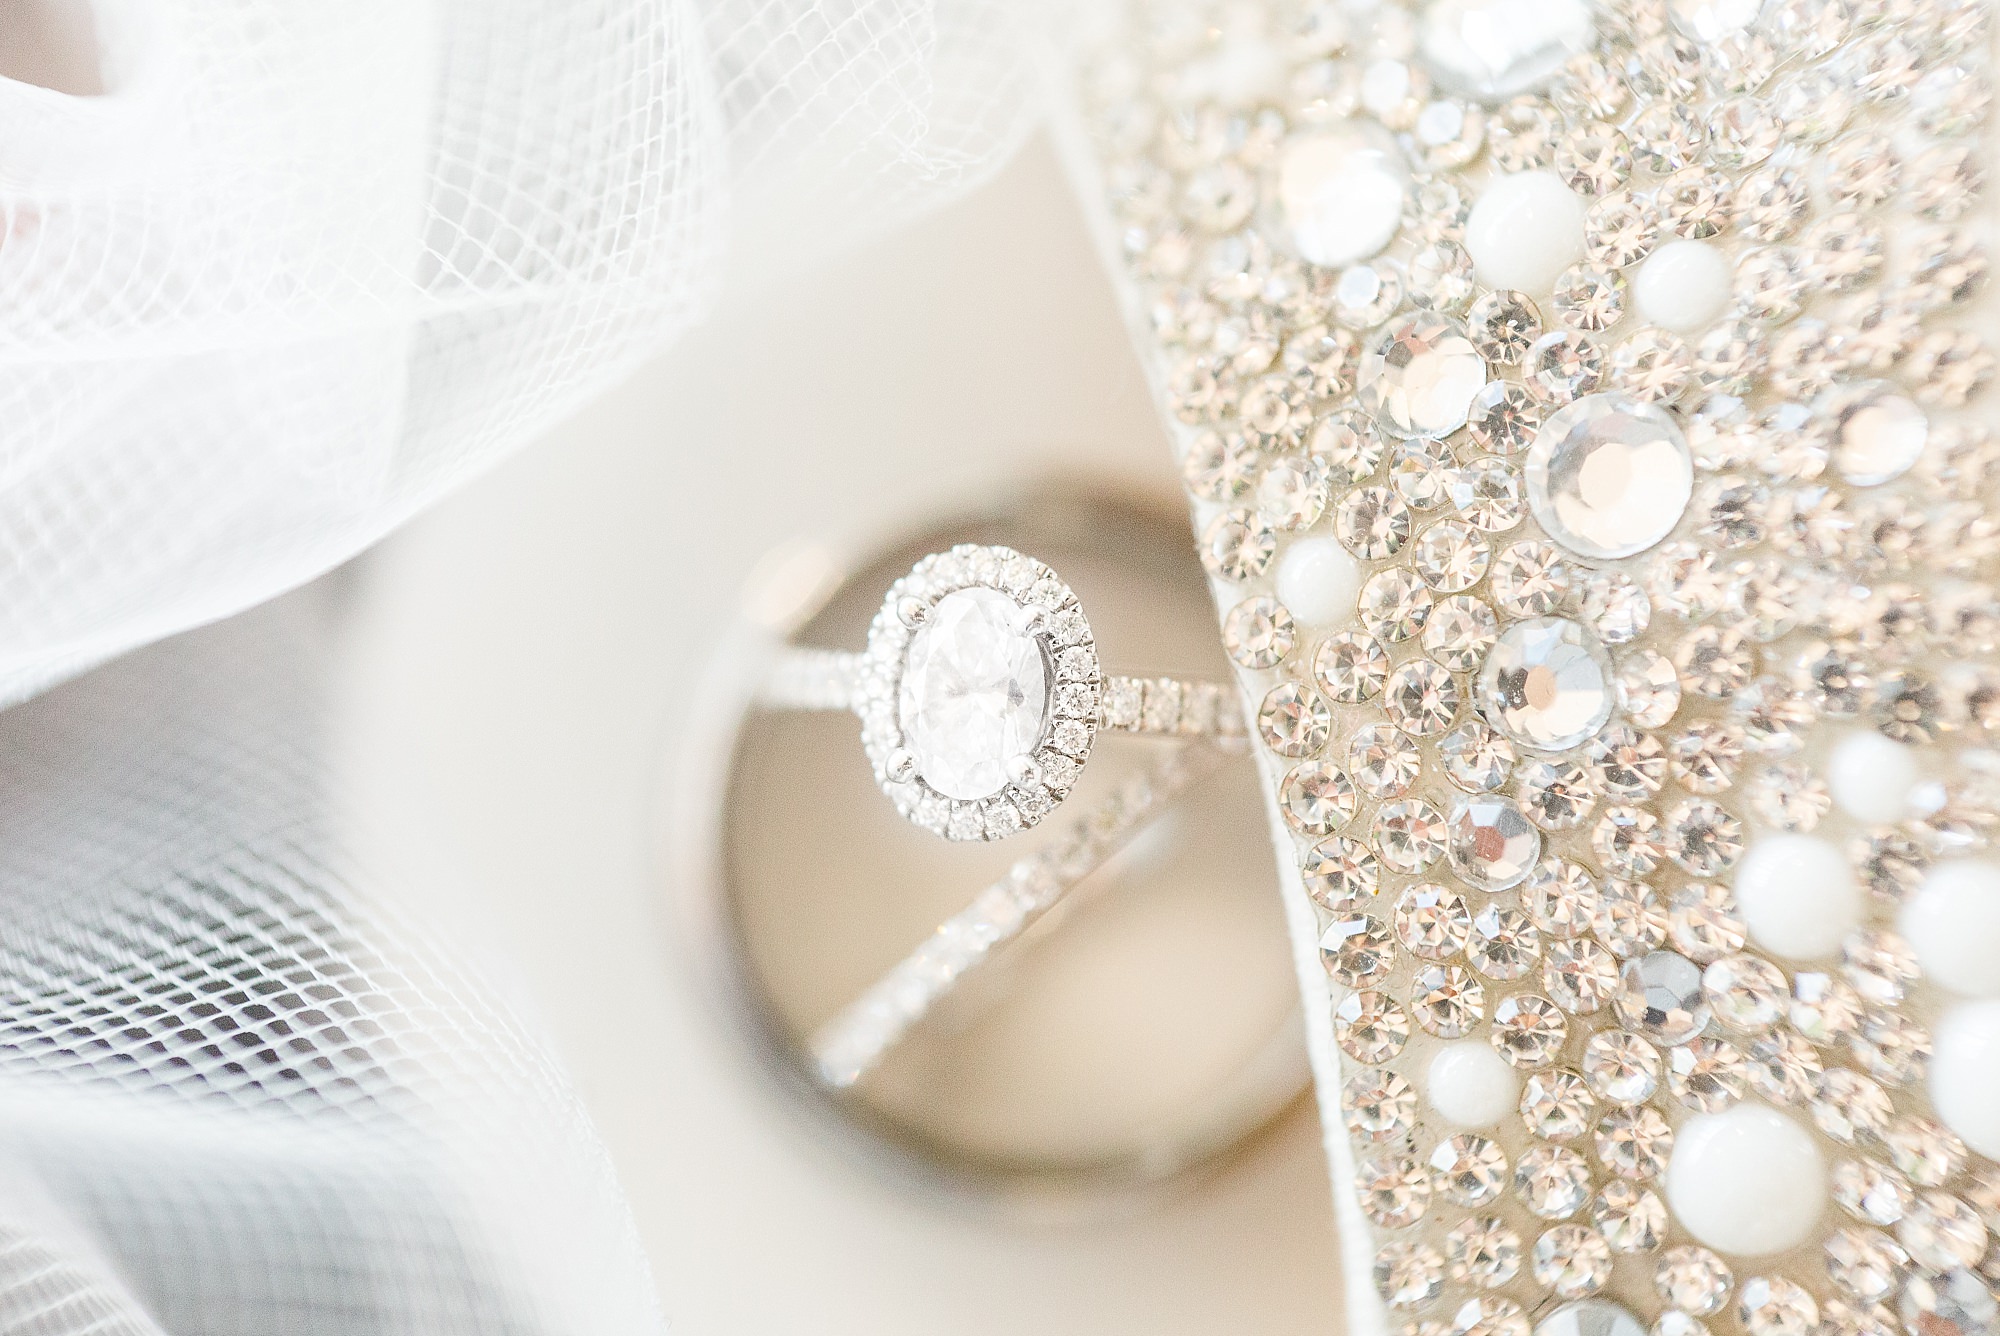 Wedding day details with diamond ring with a halo and sparkly shoes. 